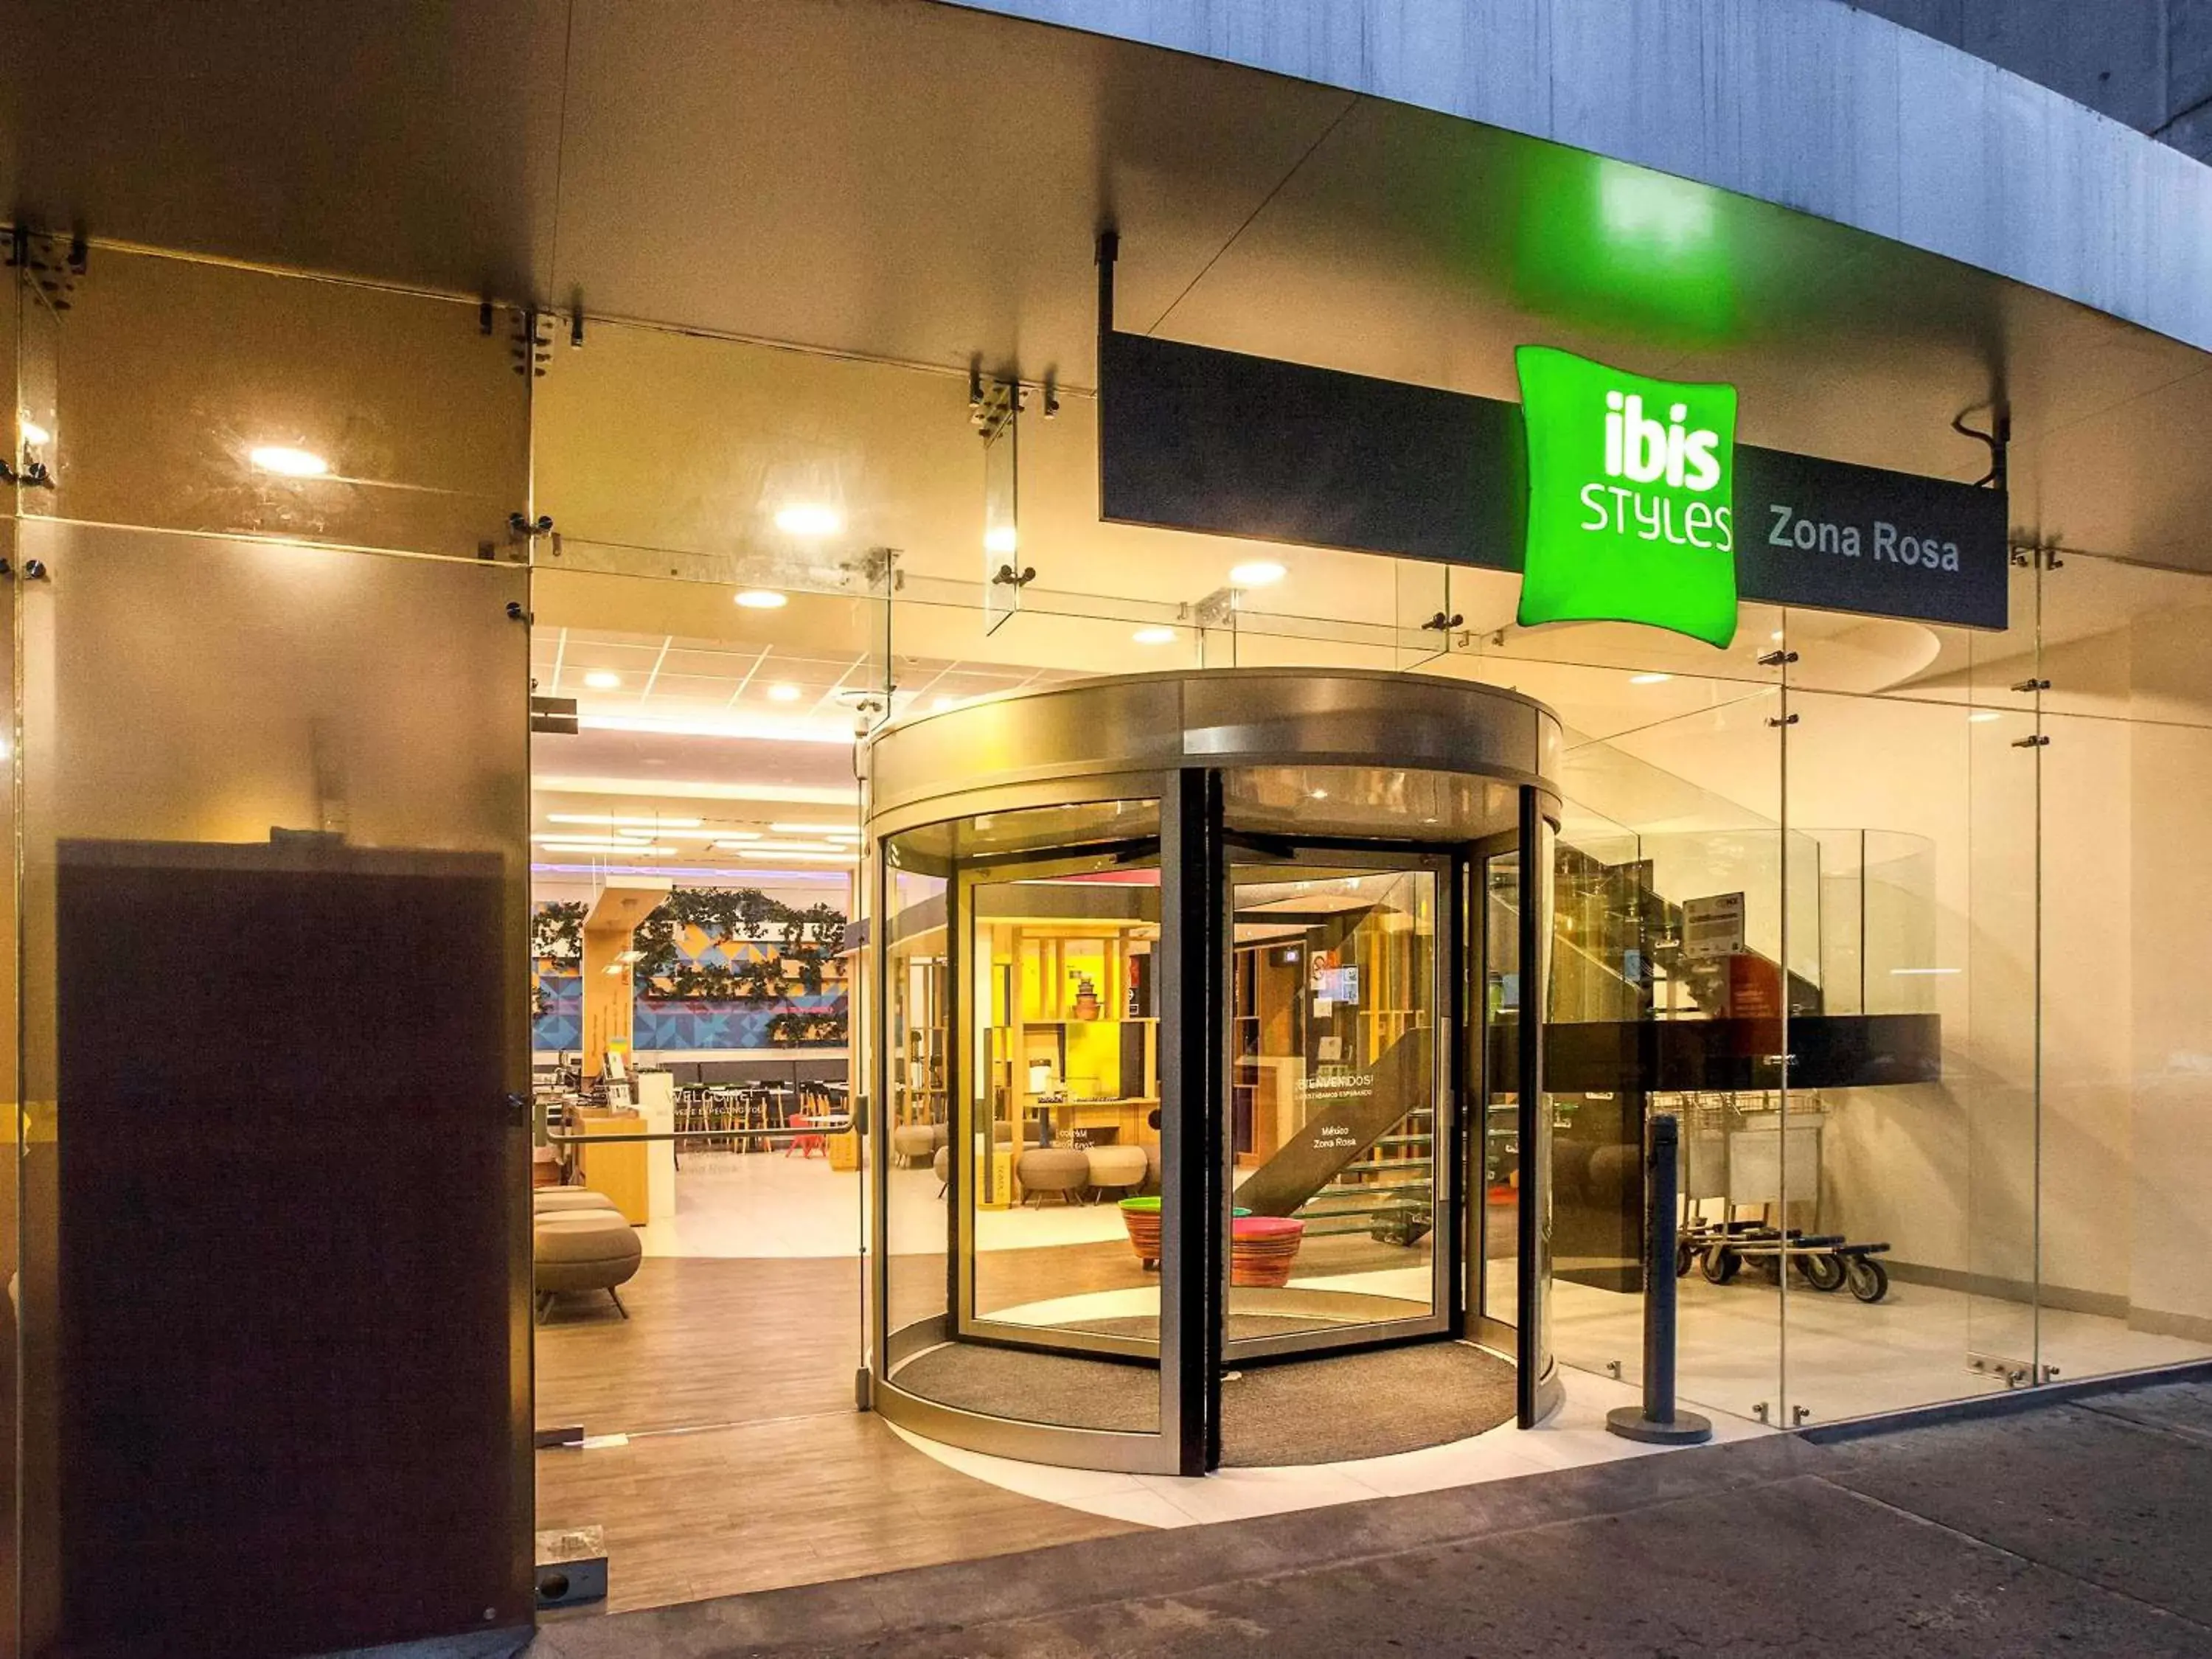 Property building in Ibis Styles Mexico Zona Rosa